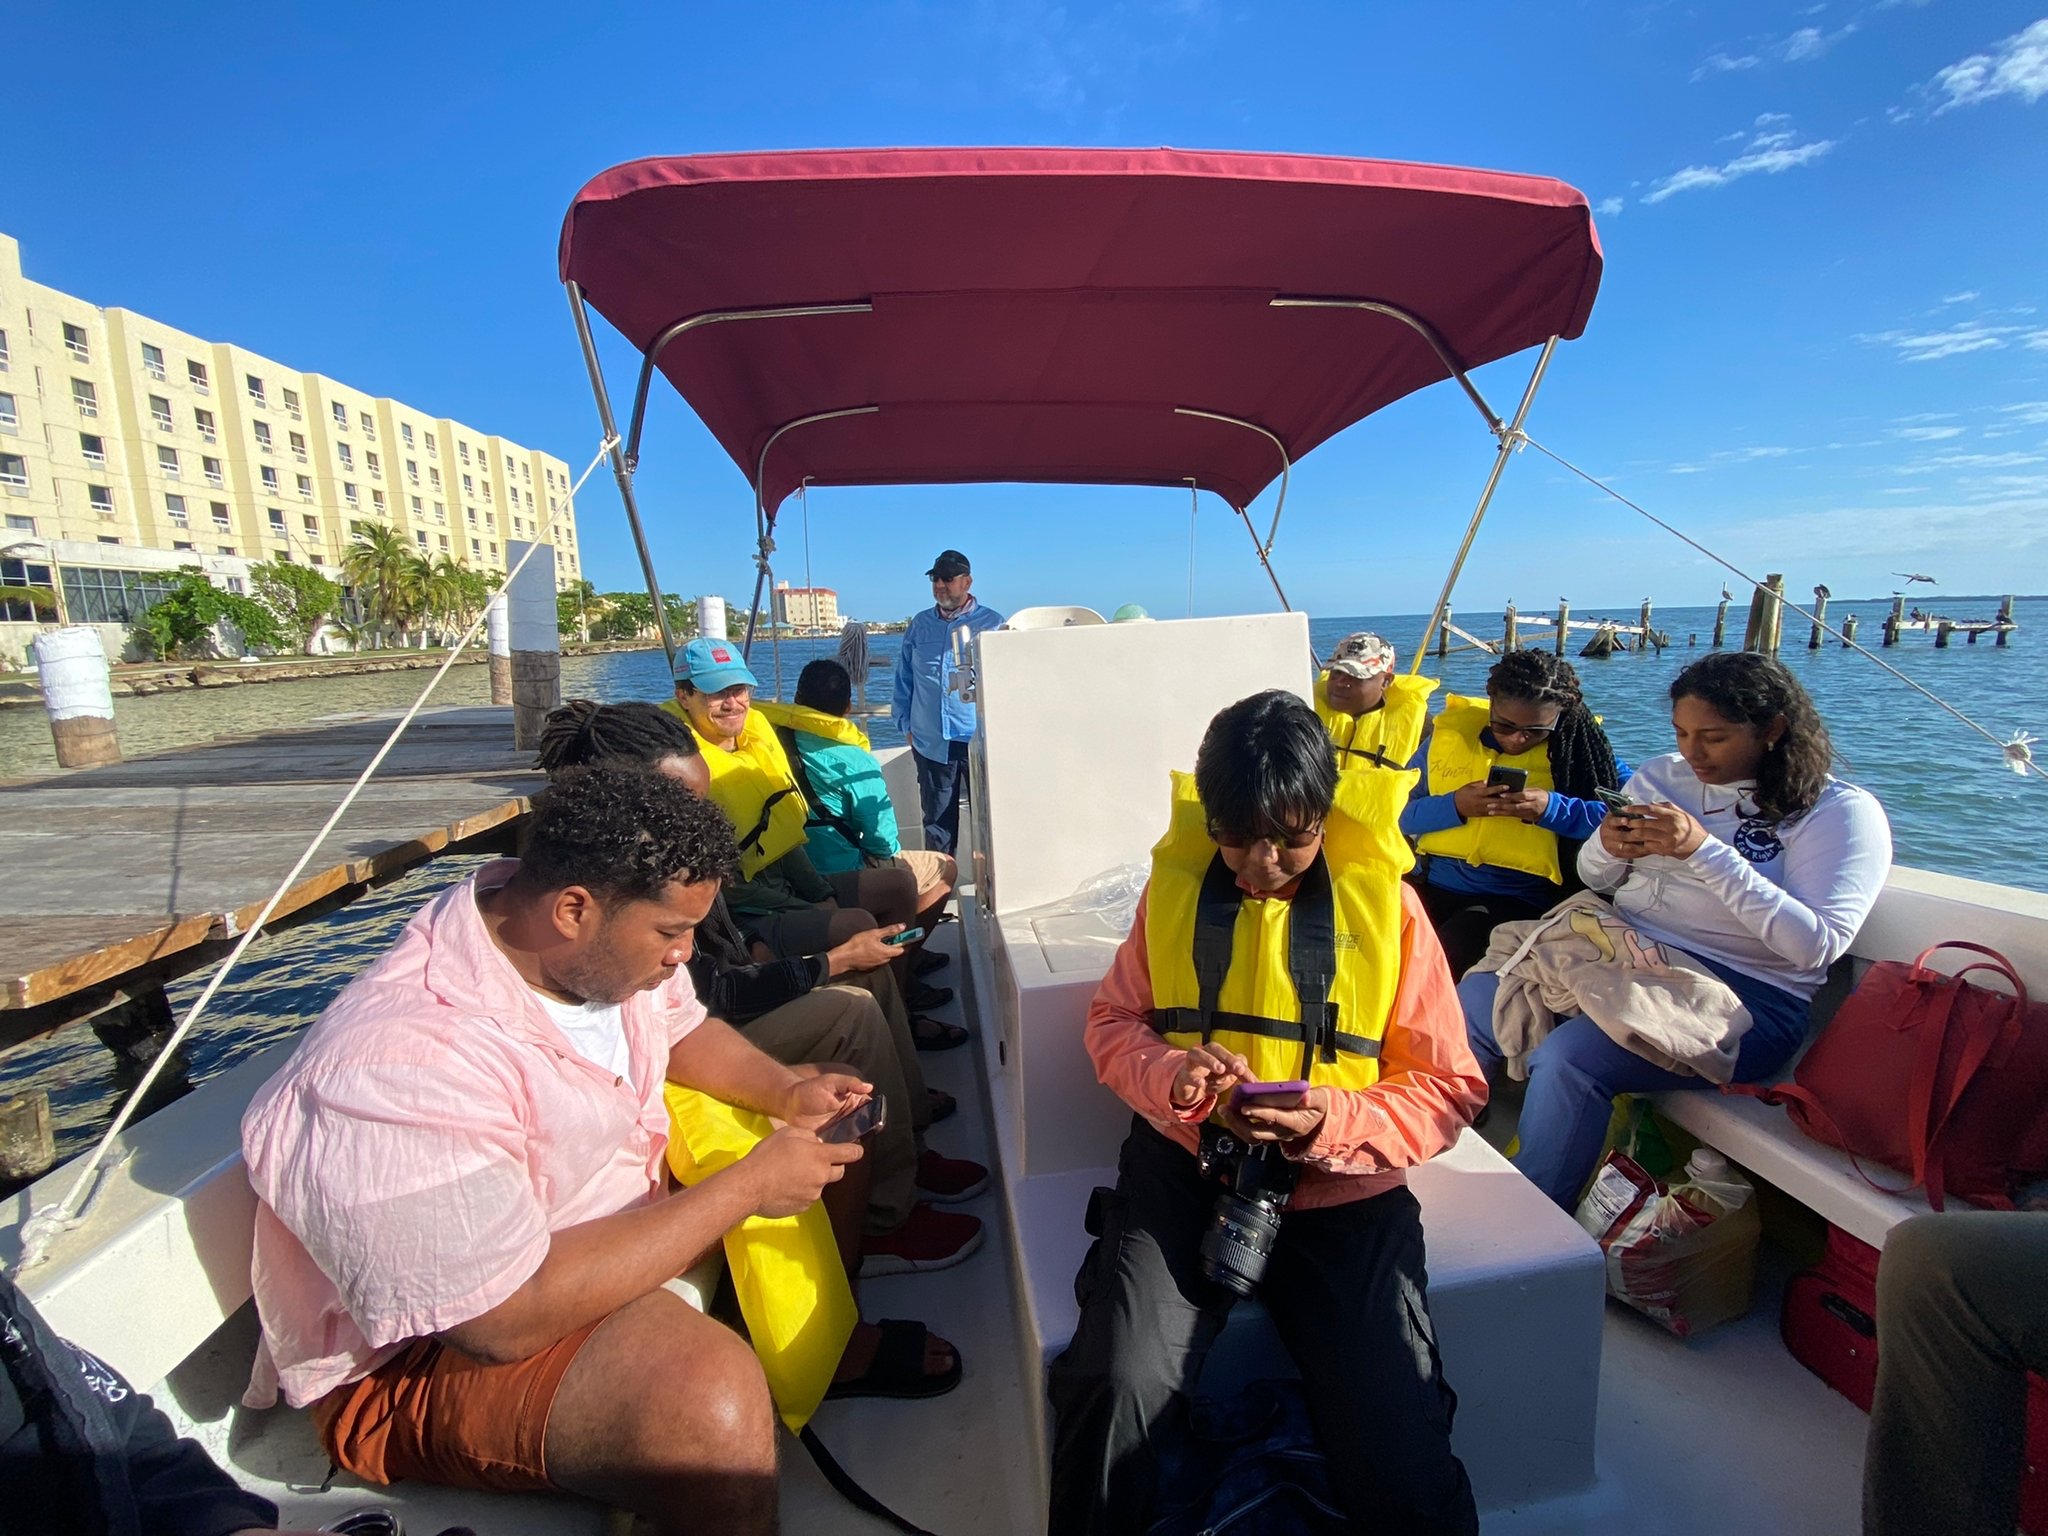 people seated on a boat in life jackets